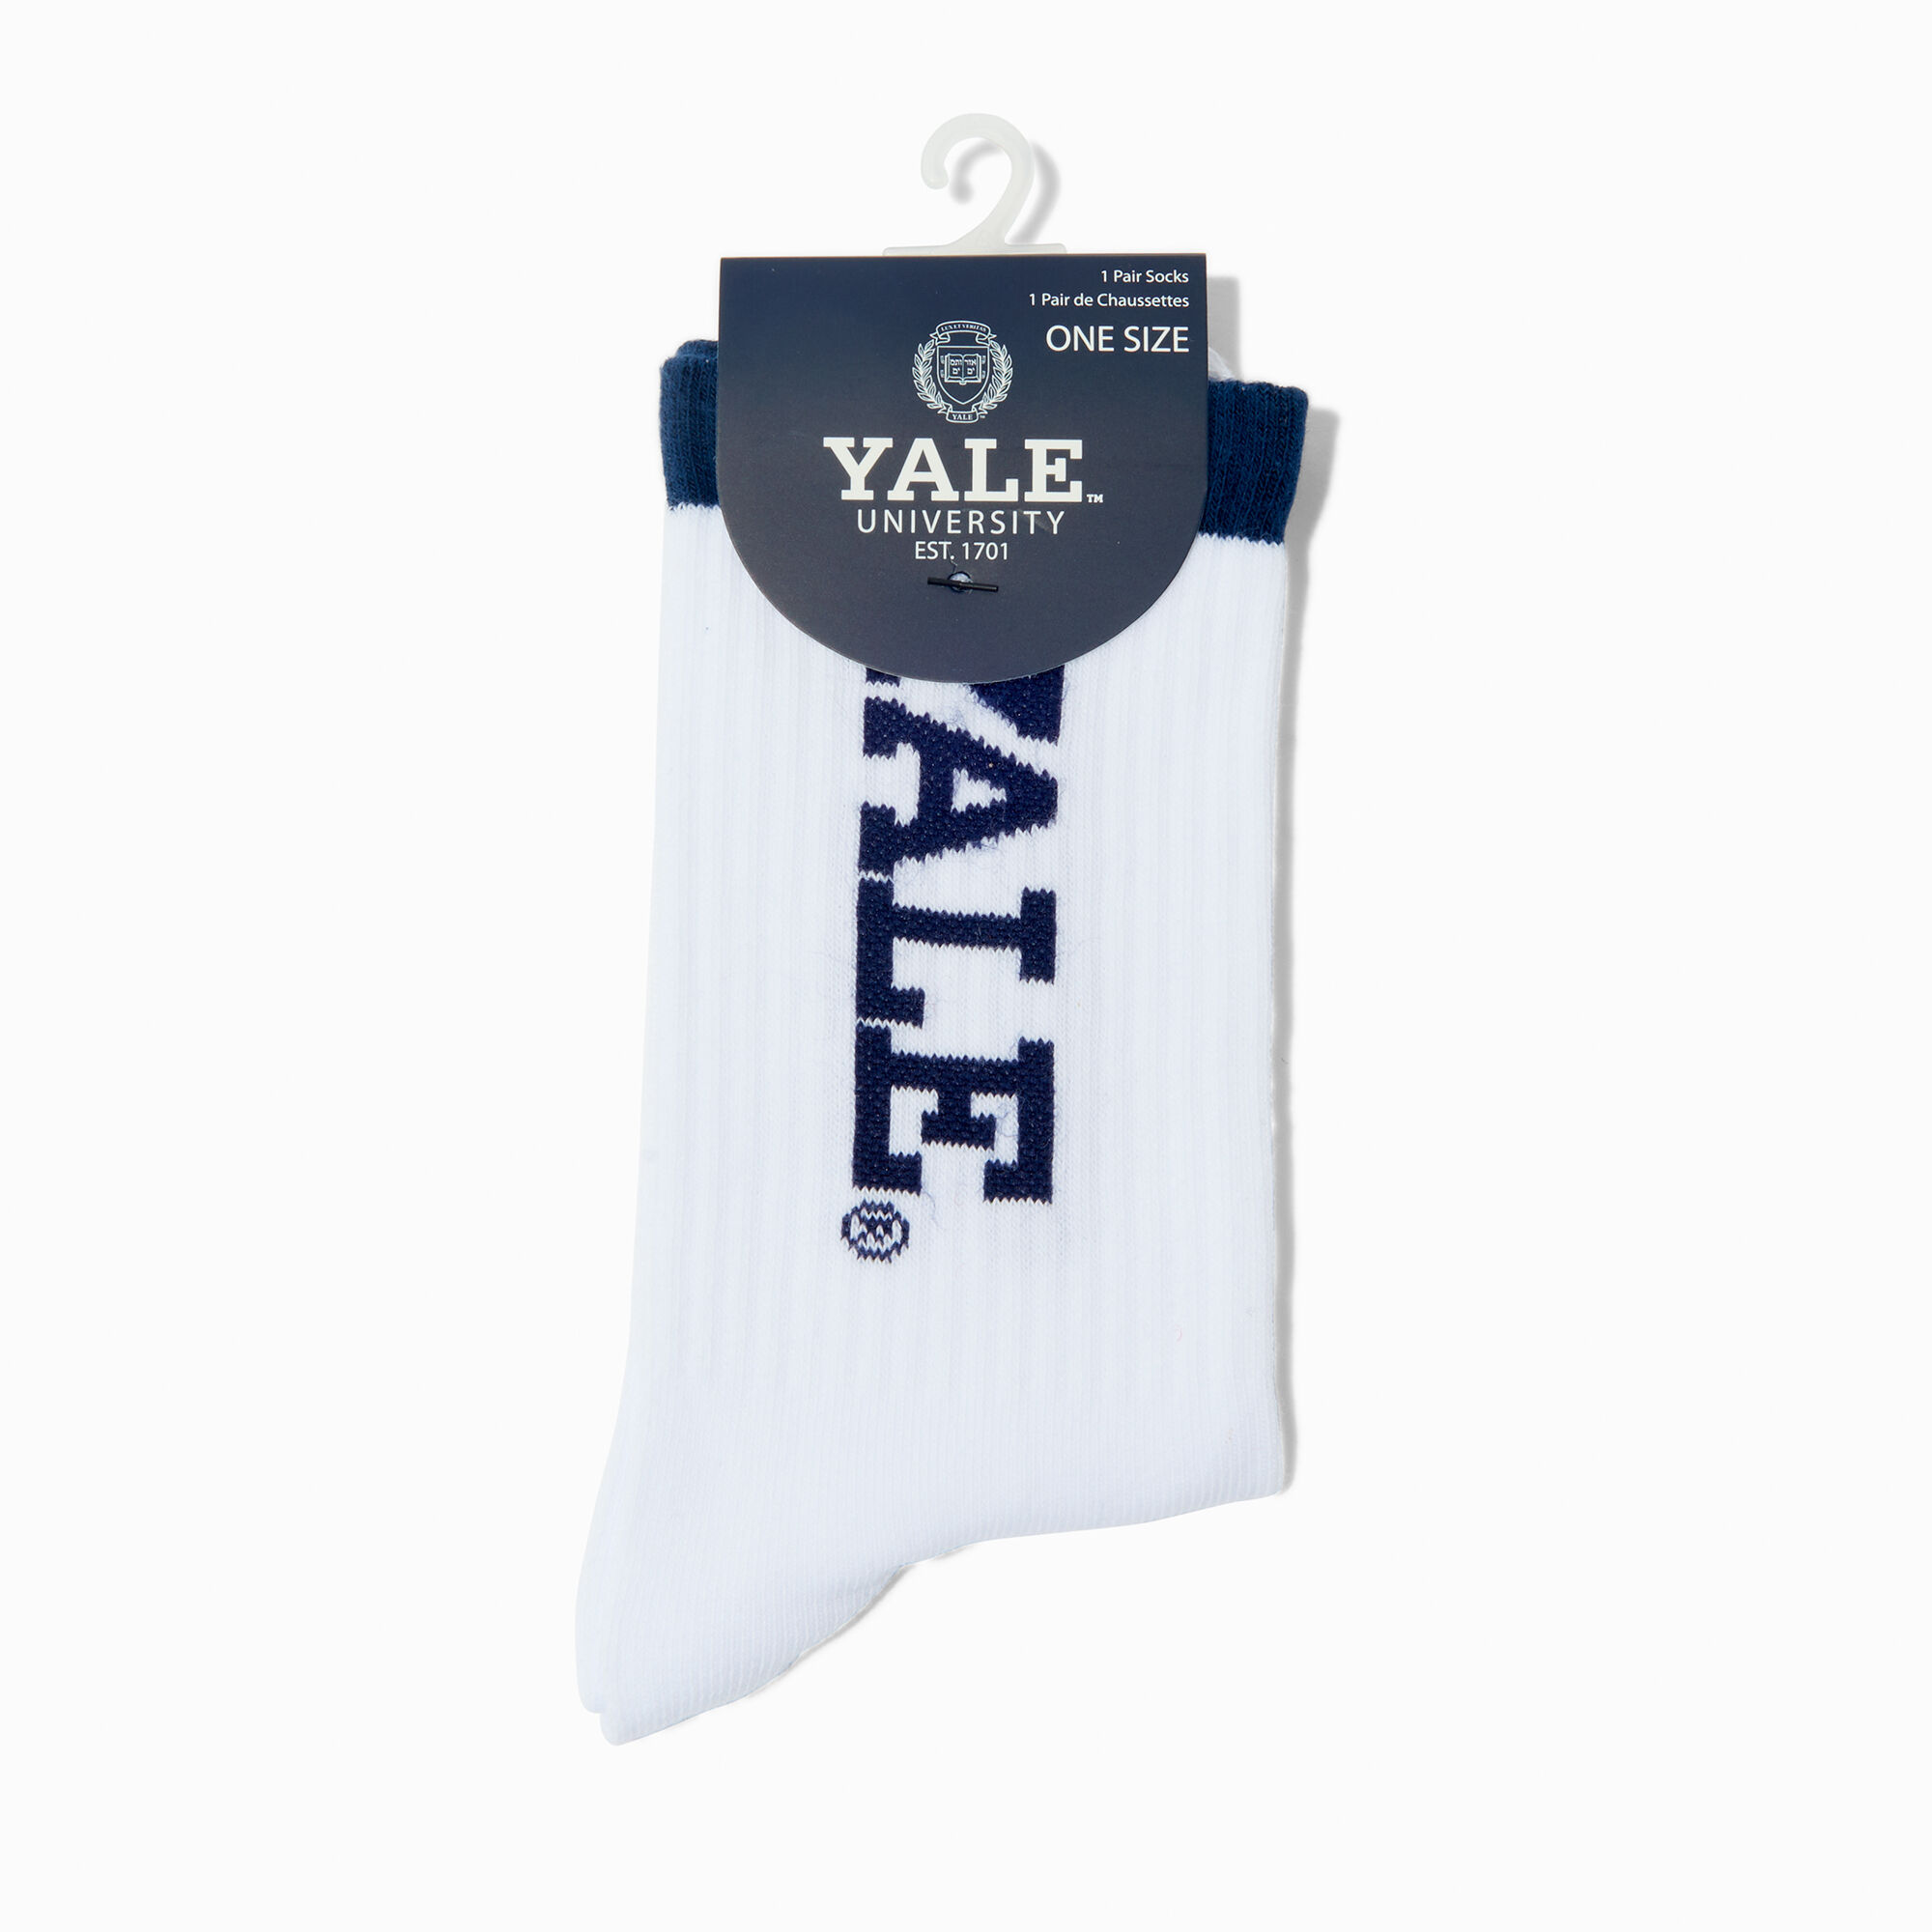 View Claires Yale Crew Socks 1 Pair information